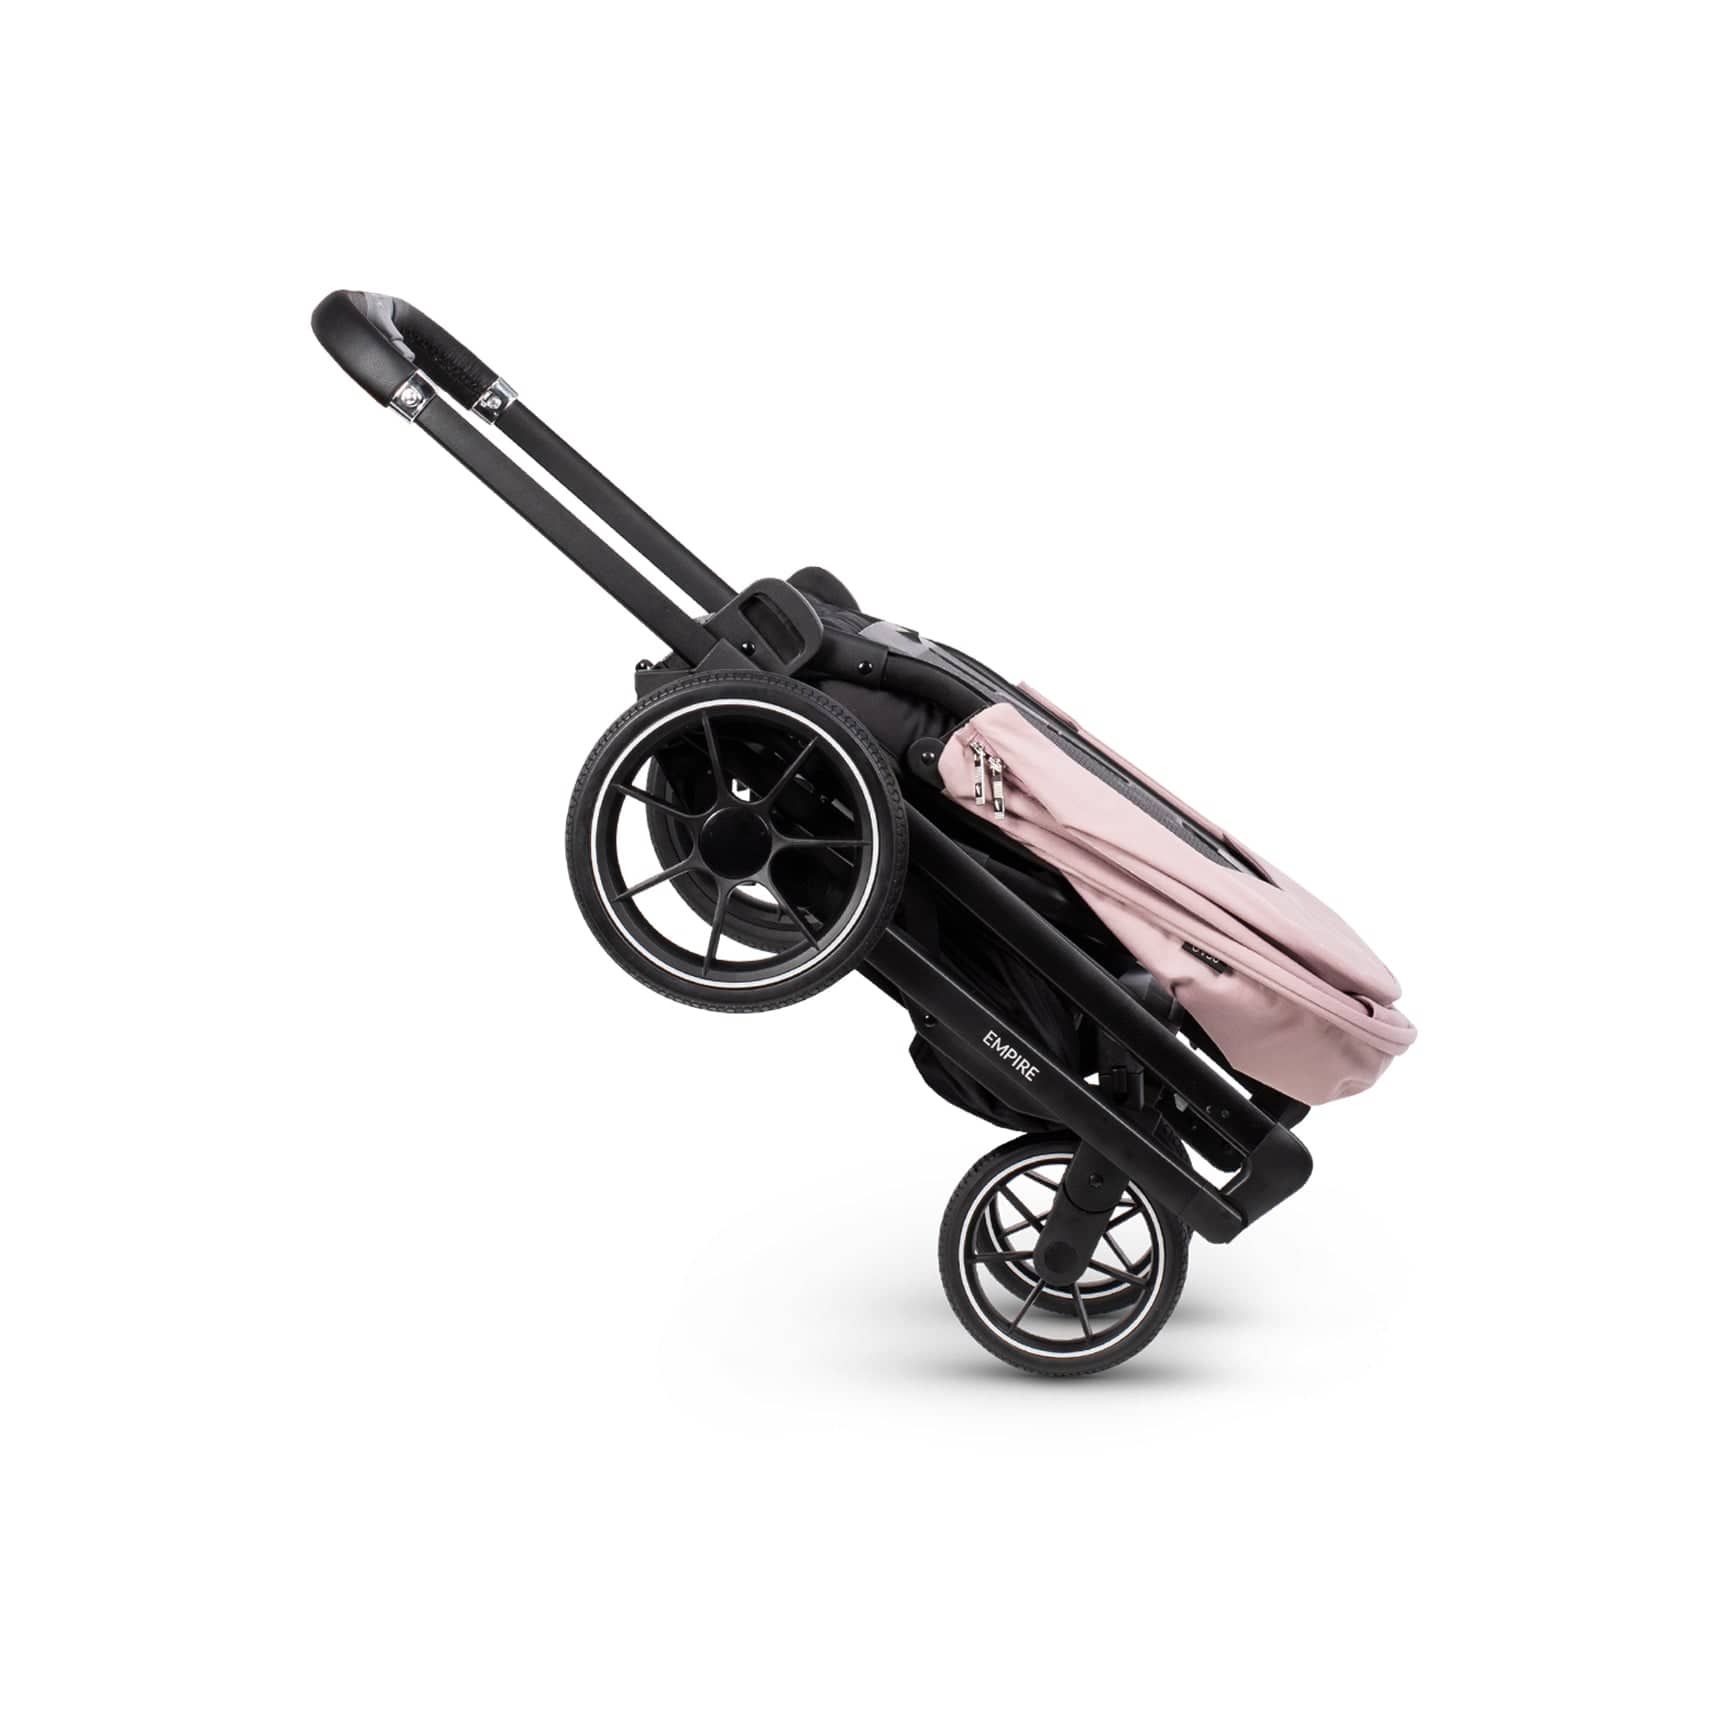 Venicci Empire Stroller & Accessory Pack in Silk Pink Pushchairs & Buggies 13177-SIL-PNK 5905261331175